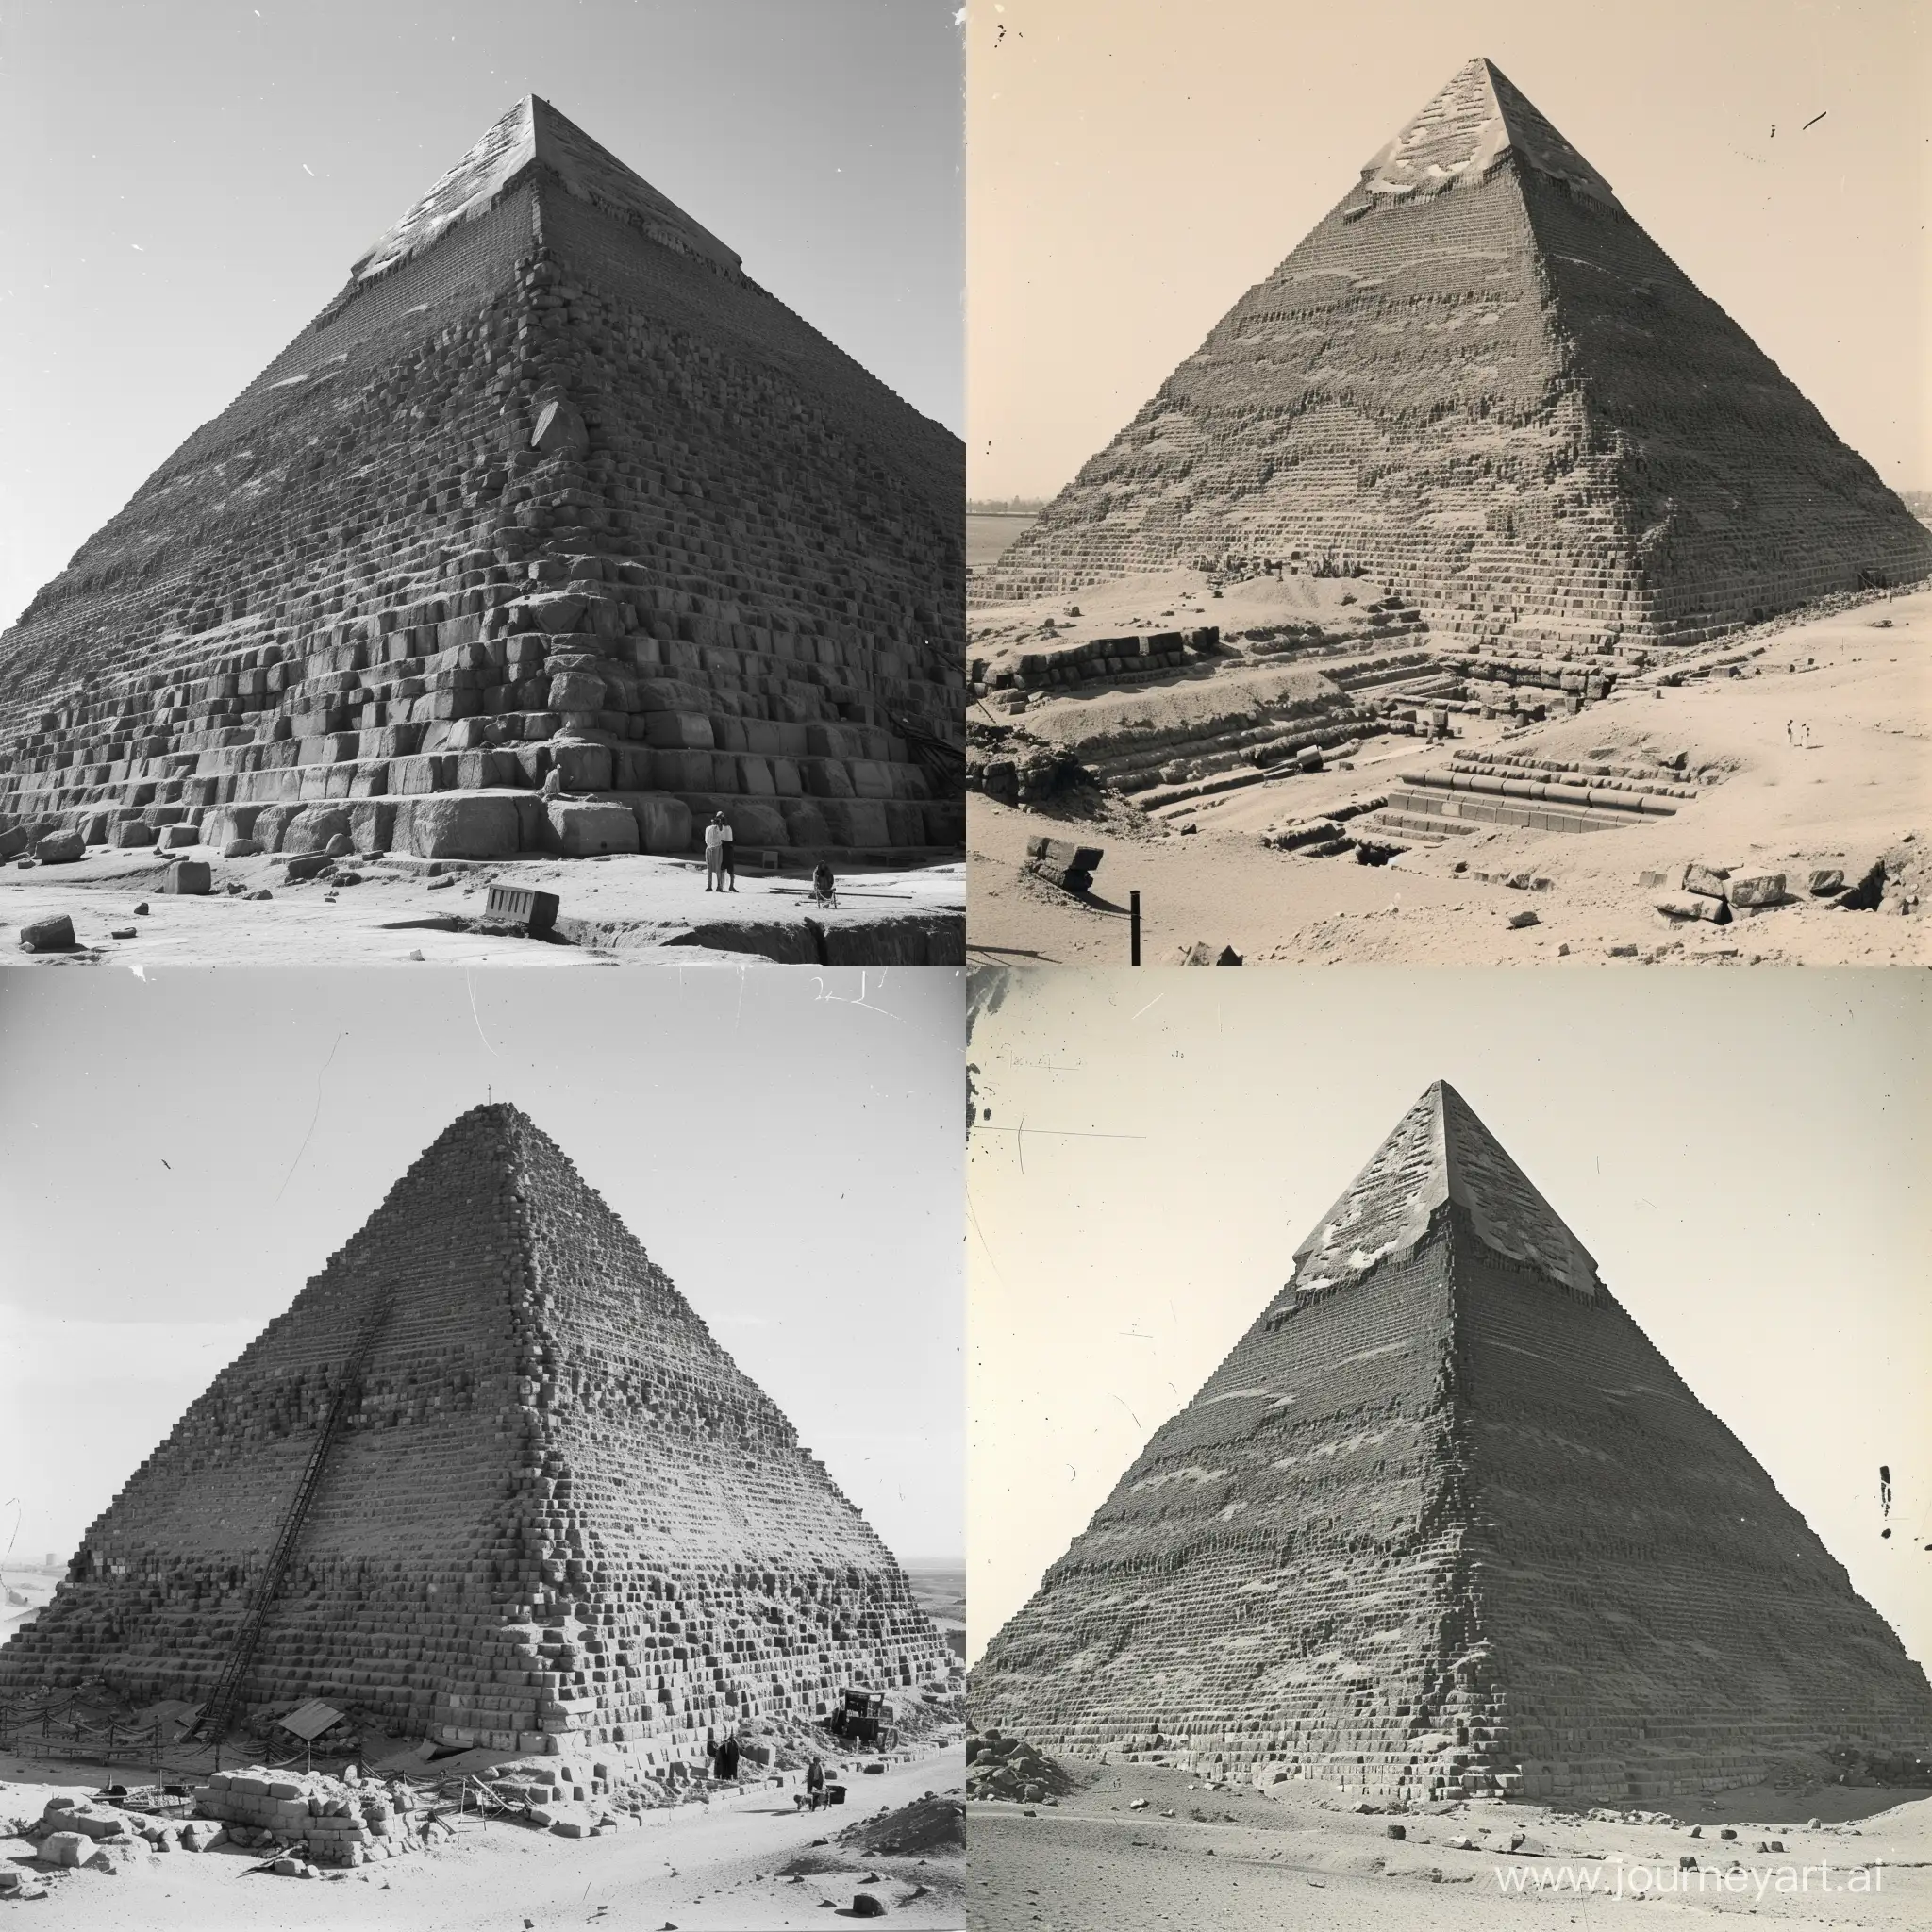 Building the pyramid of Giza, historical, towards its completion